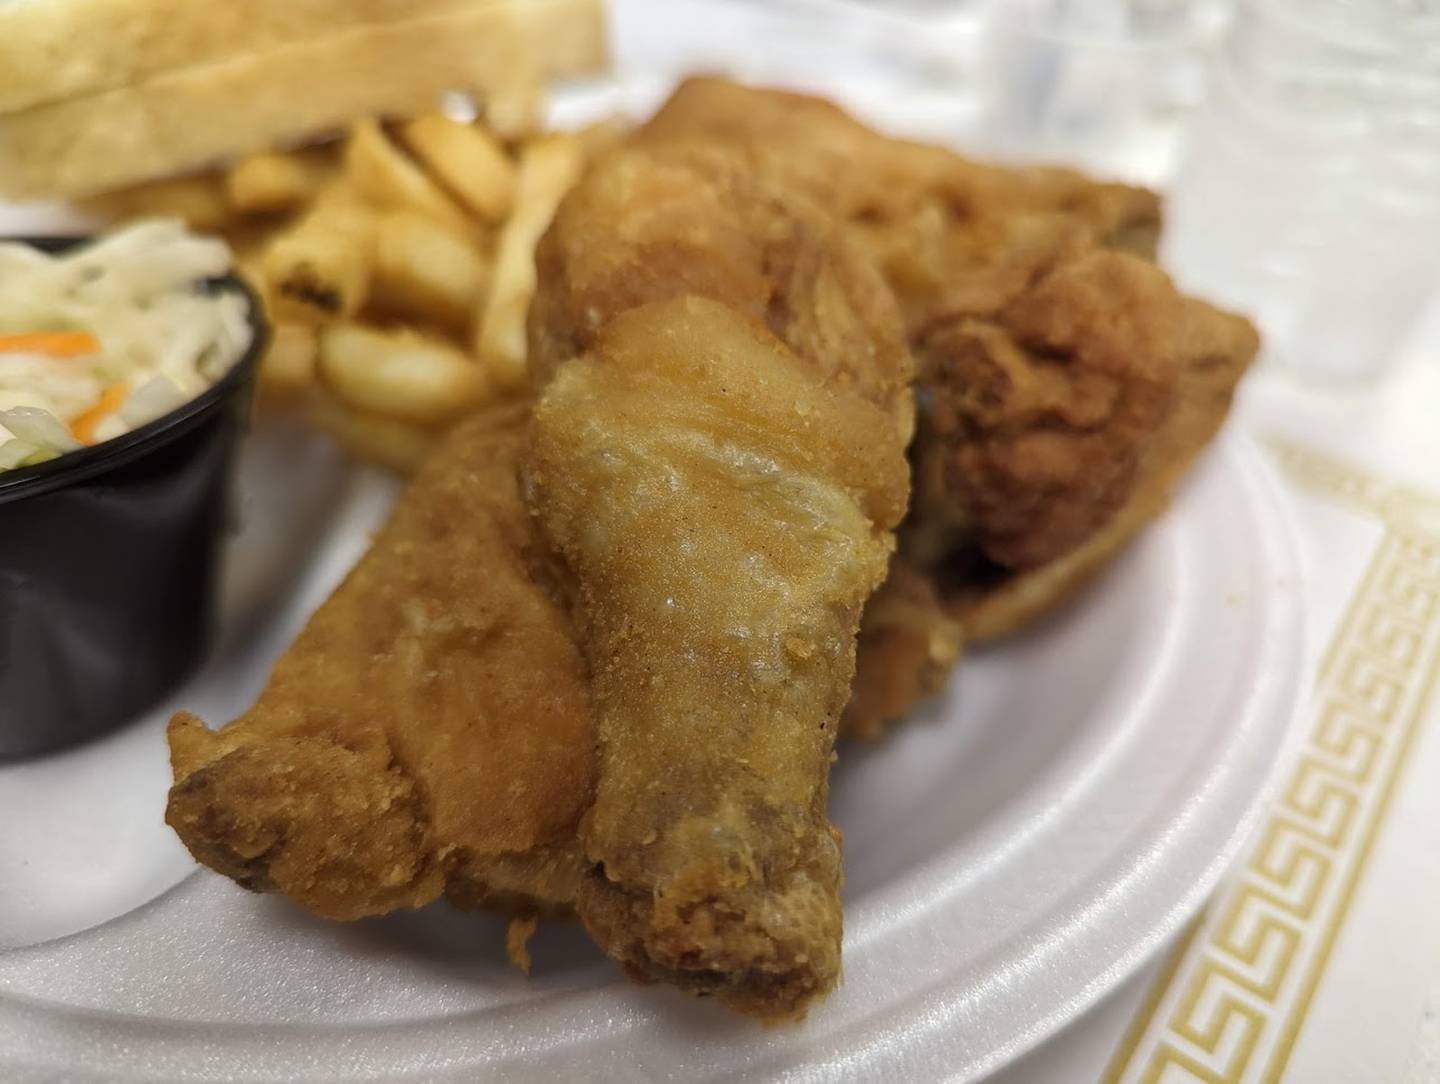 Pictured are the dark meat portions of a half chicken dinner as served at the Knights of Columbus Holy Trinity Council No. 4400 on Joliet's East side. The dinner also came with battered fries, vinegar cole slaw and two slices of bread.